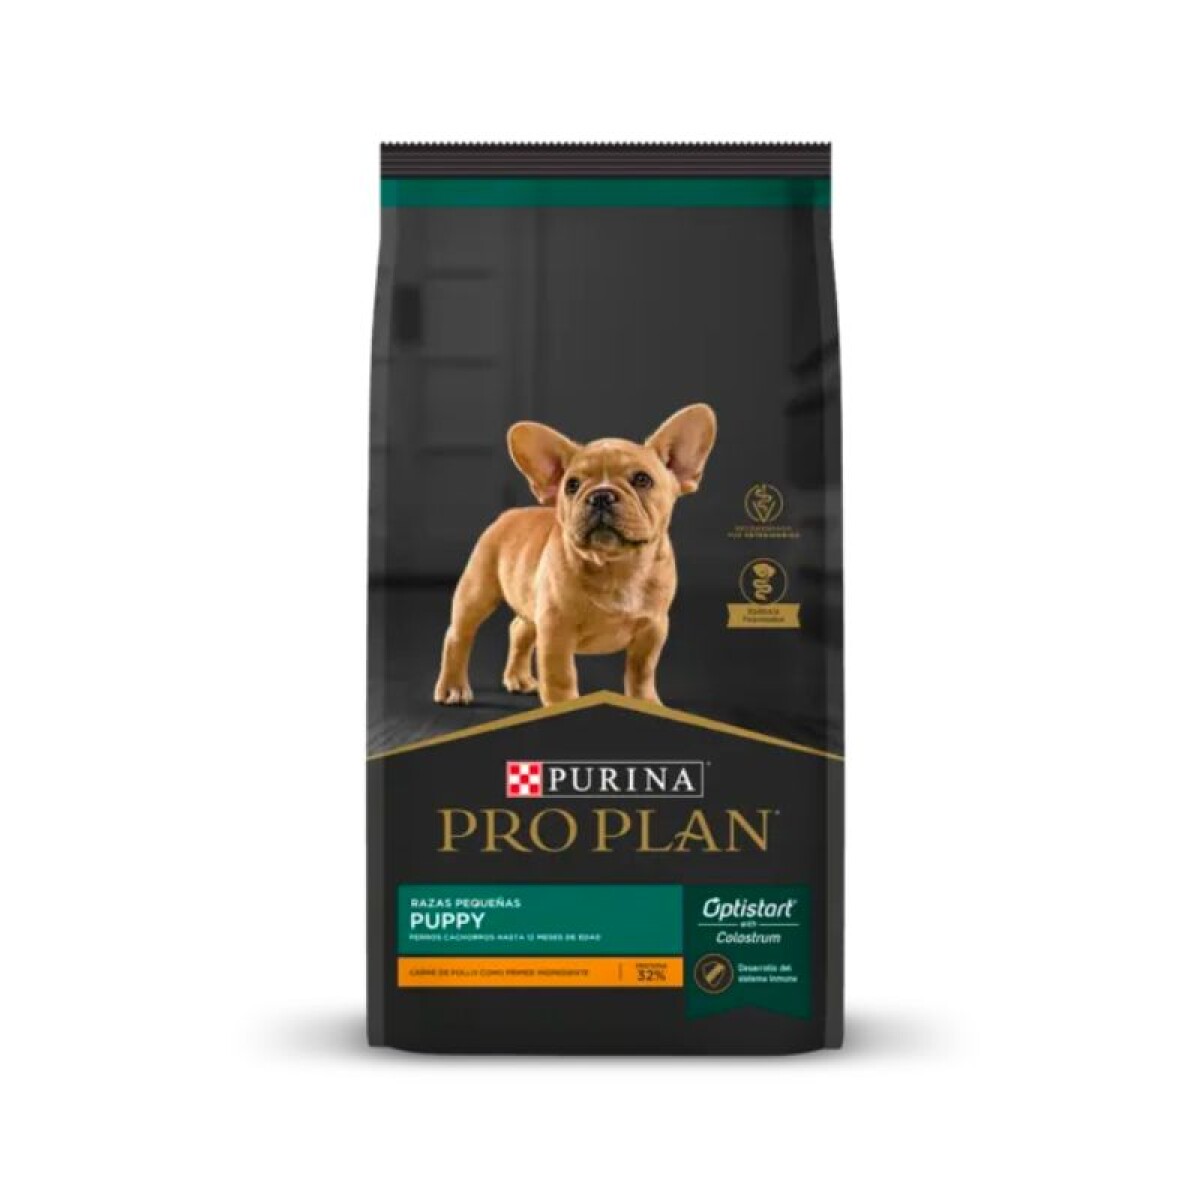 PROPLAN PUPPY SMALL BREEDS 7,5 KG - Proplan Puppy Small Breeds 7,5 Kg 